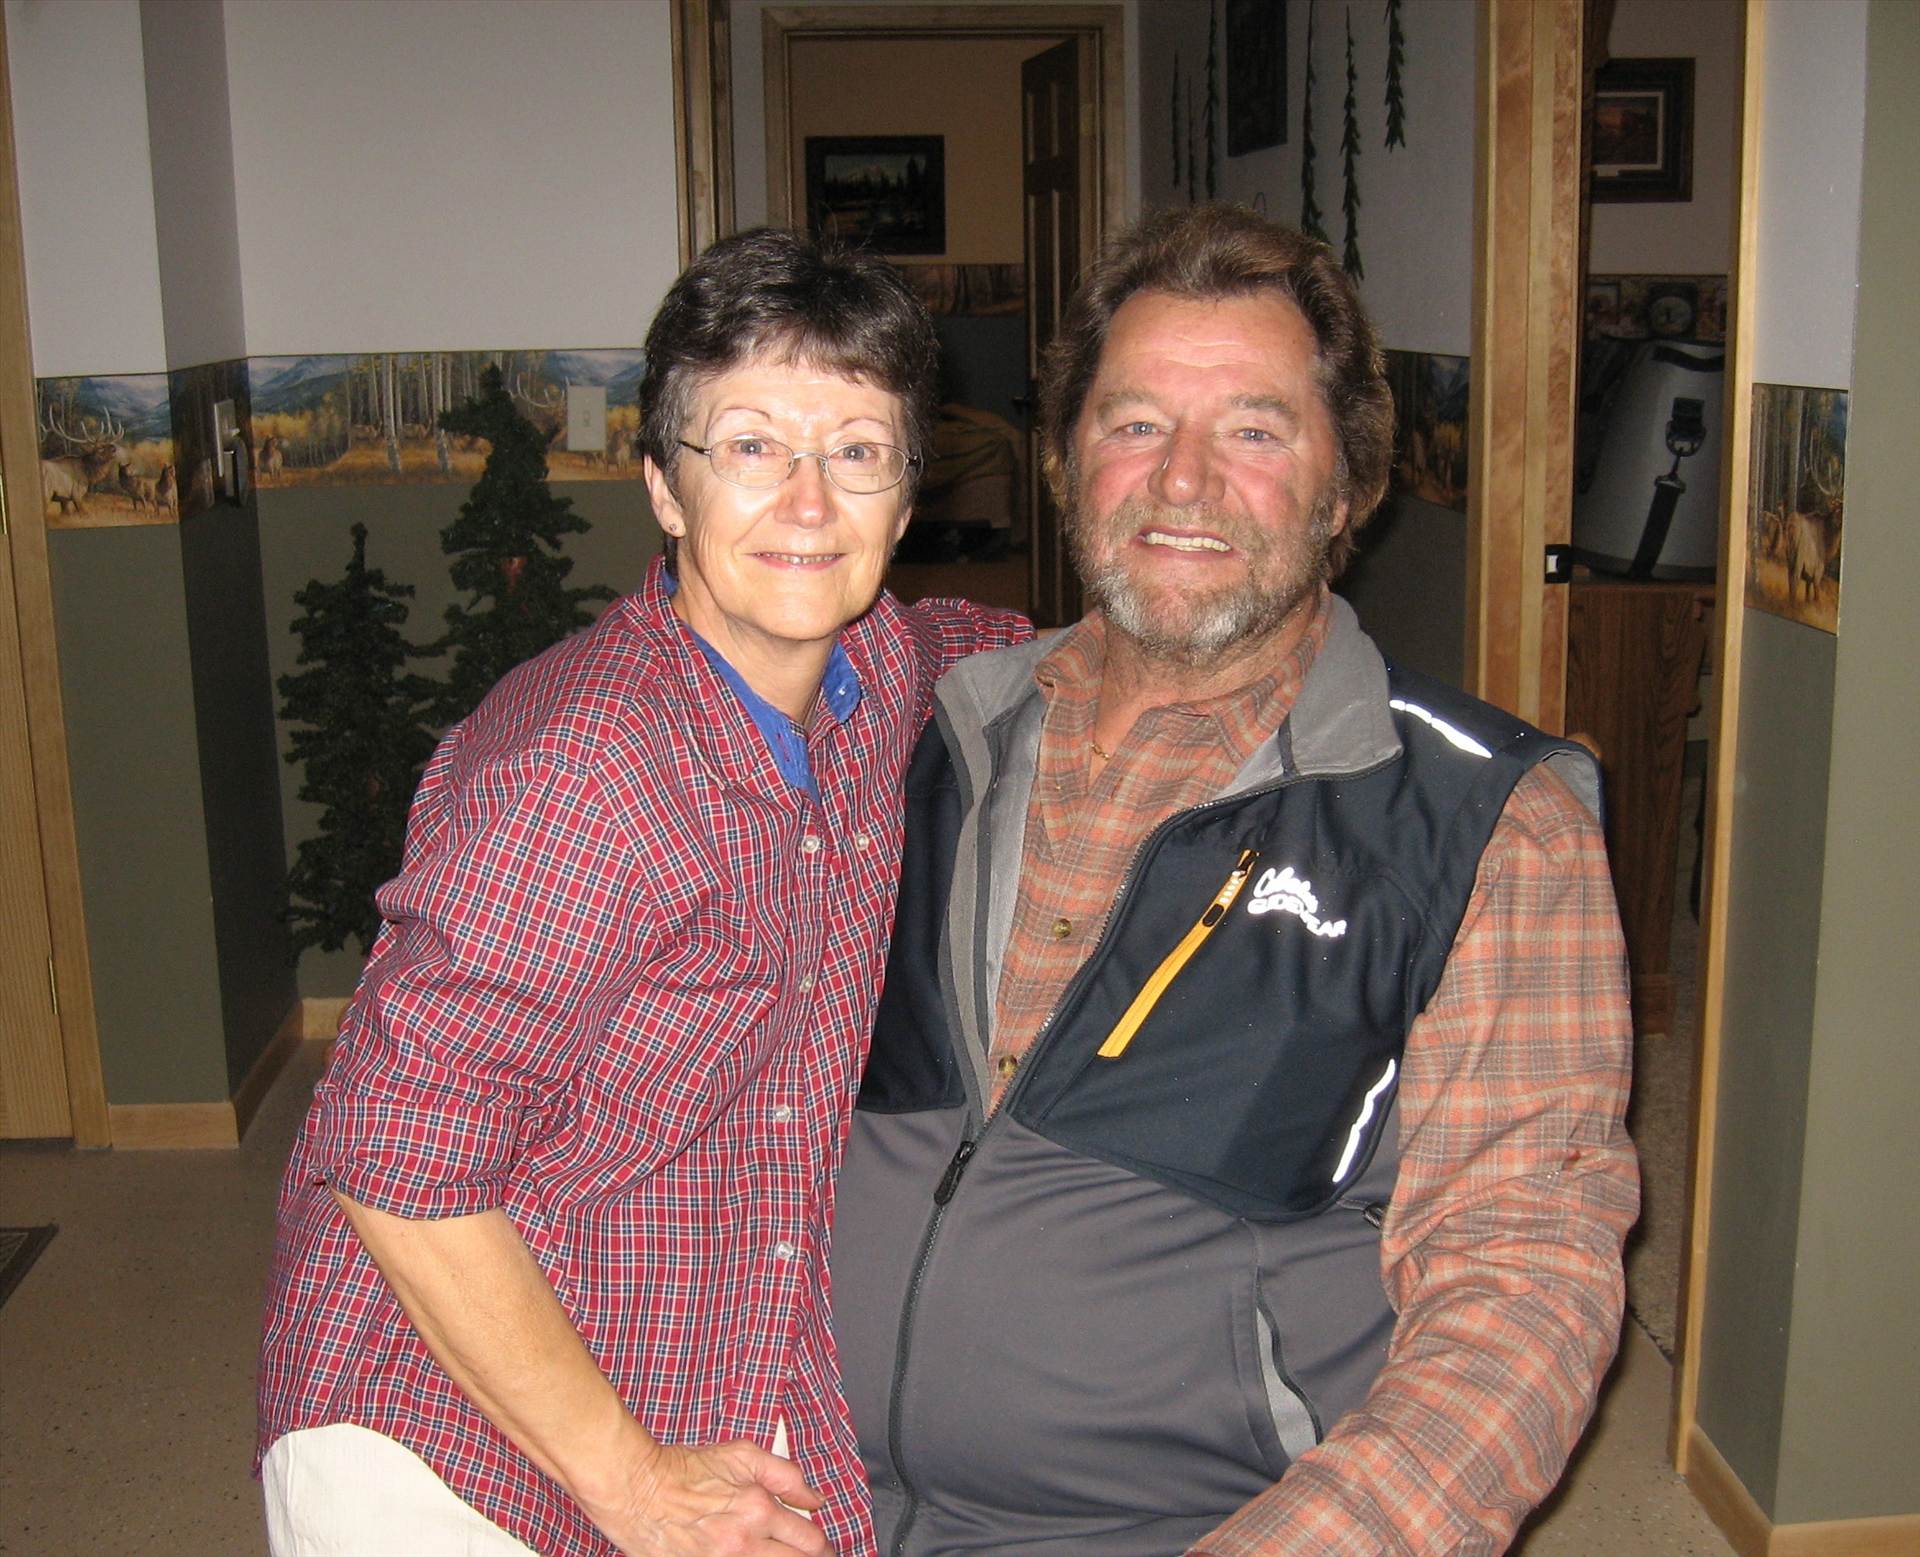 Babe_W-n-Mom_1_OCT-2015 (2).JPG Mom and Babe Winkelman by Wild Bill Hiccup